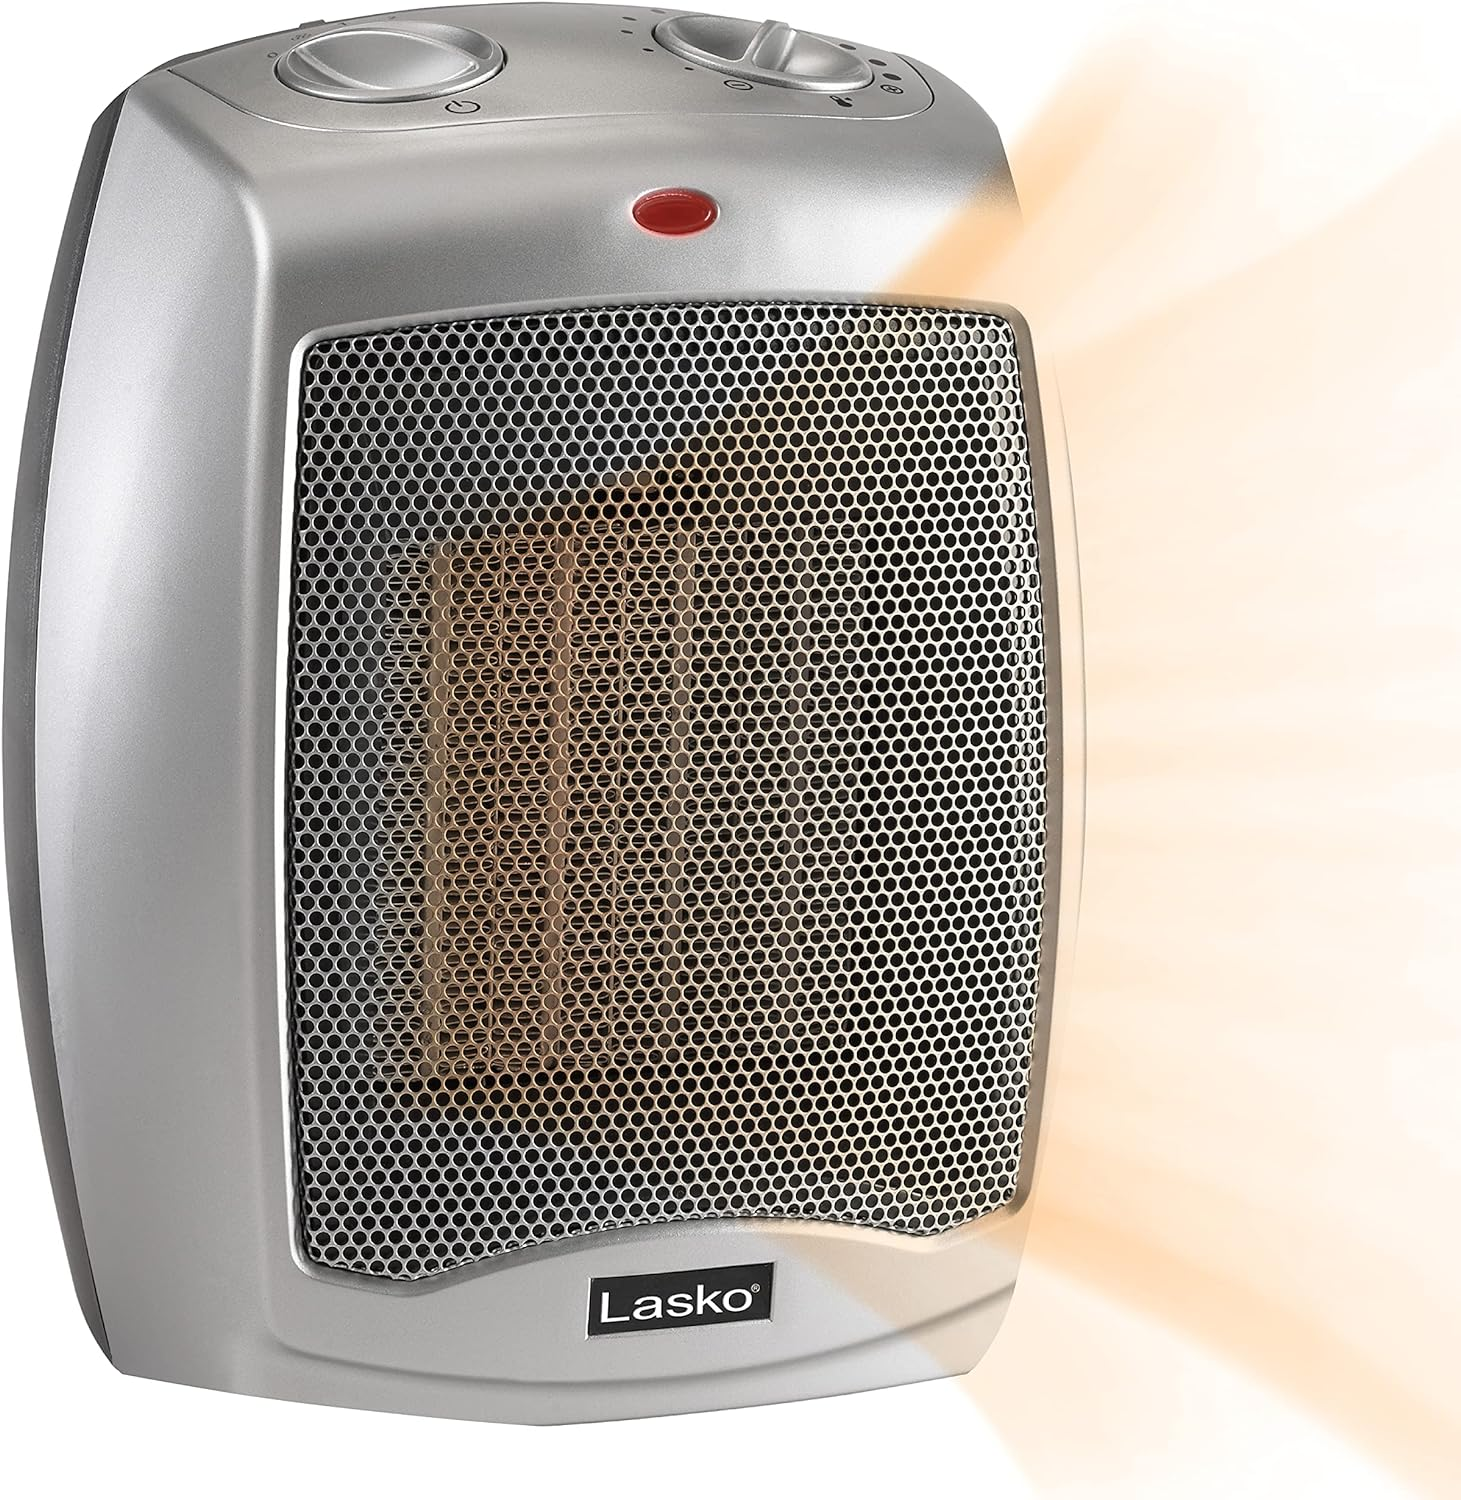 Lasko 9" 1500W Electric Ceramic Space Heater with Adjustable Thermostat, Silver, 754200, New $10.62